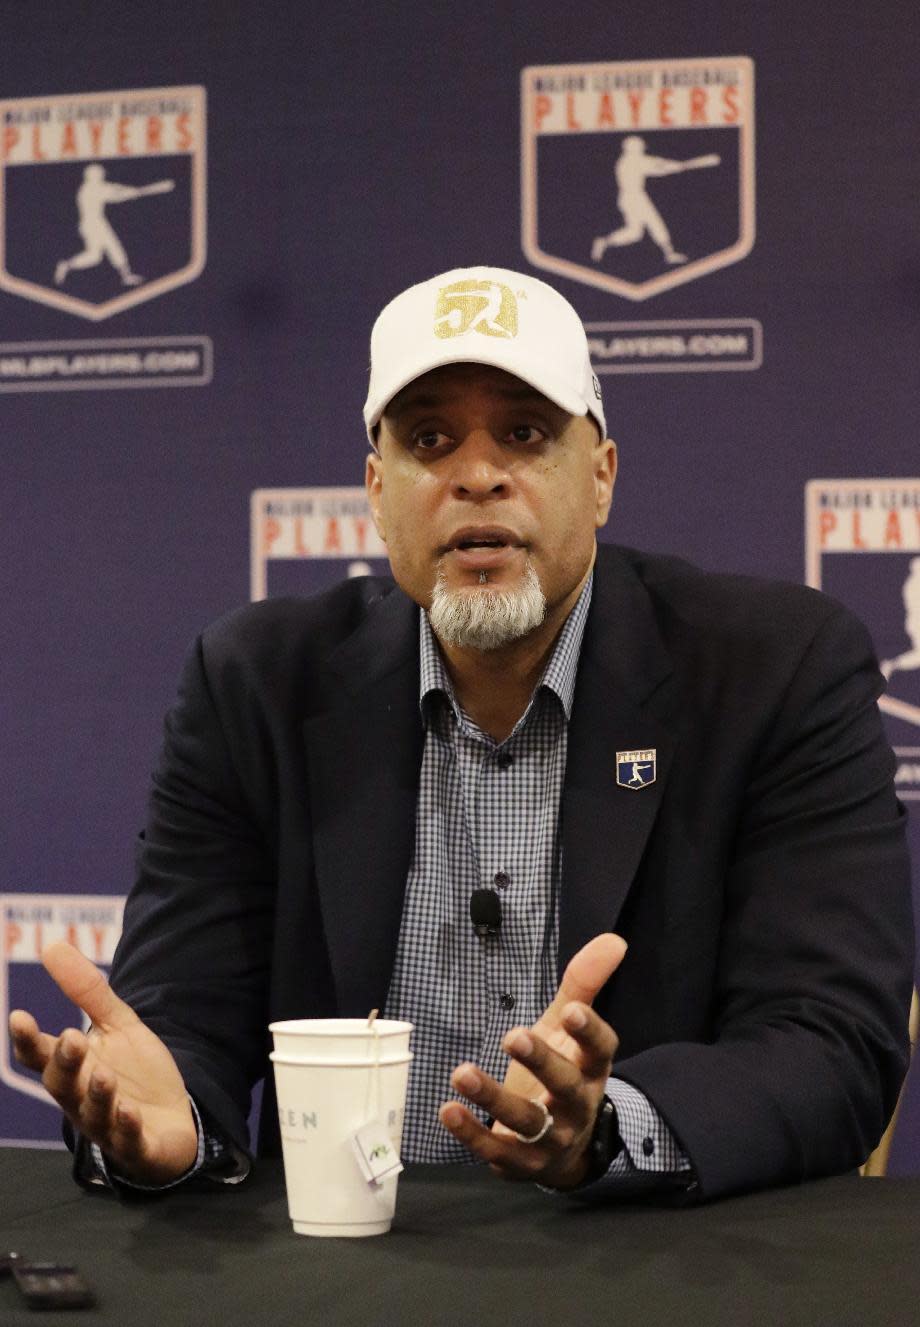 Executive Director of the Major League Players Association Tony Clark answers questions at a news conference Sunday, Feb. 19, 2017, in Phoenix. (AP Photo/Morry Gash)